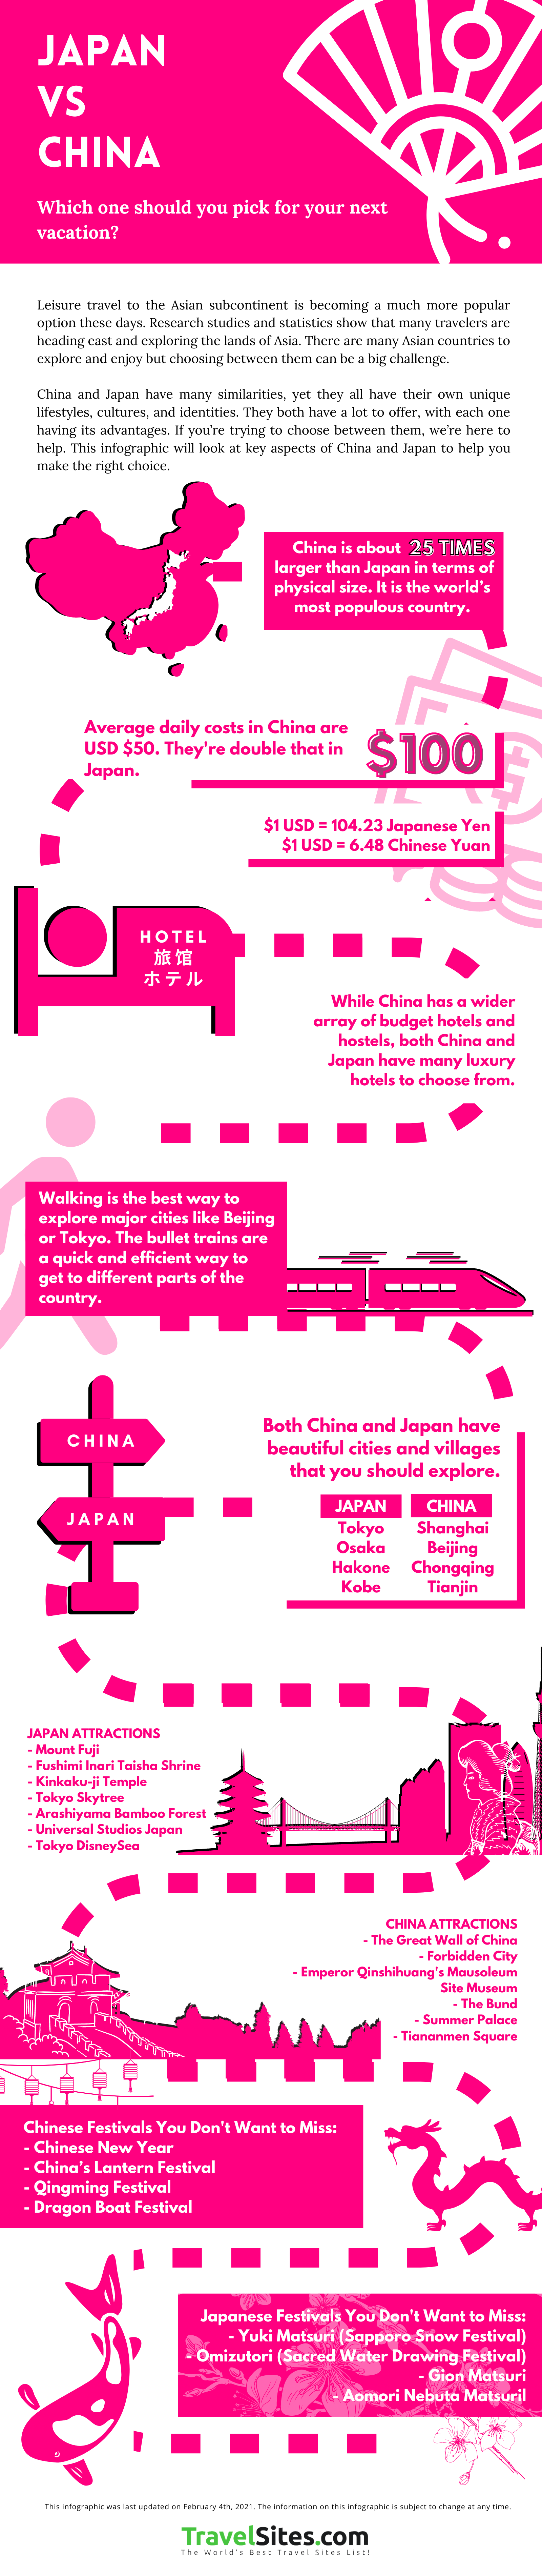 Japan VS China: Which one should you pick for your next vacation? Infographic